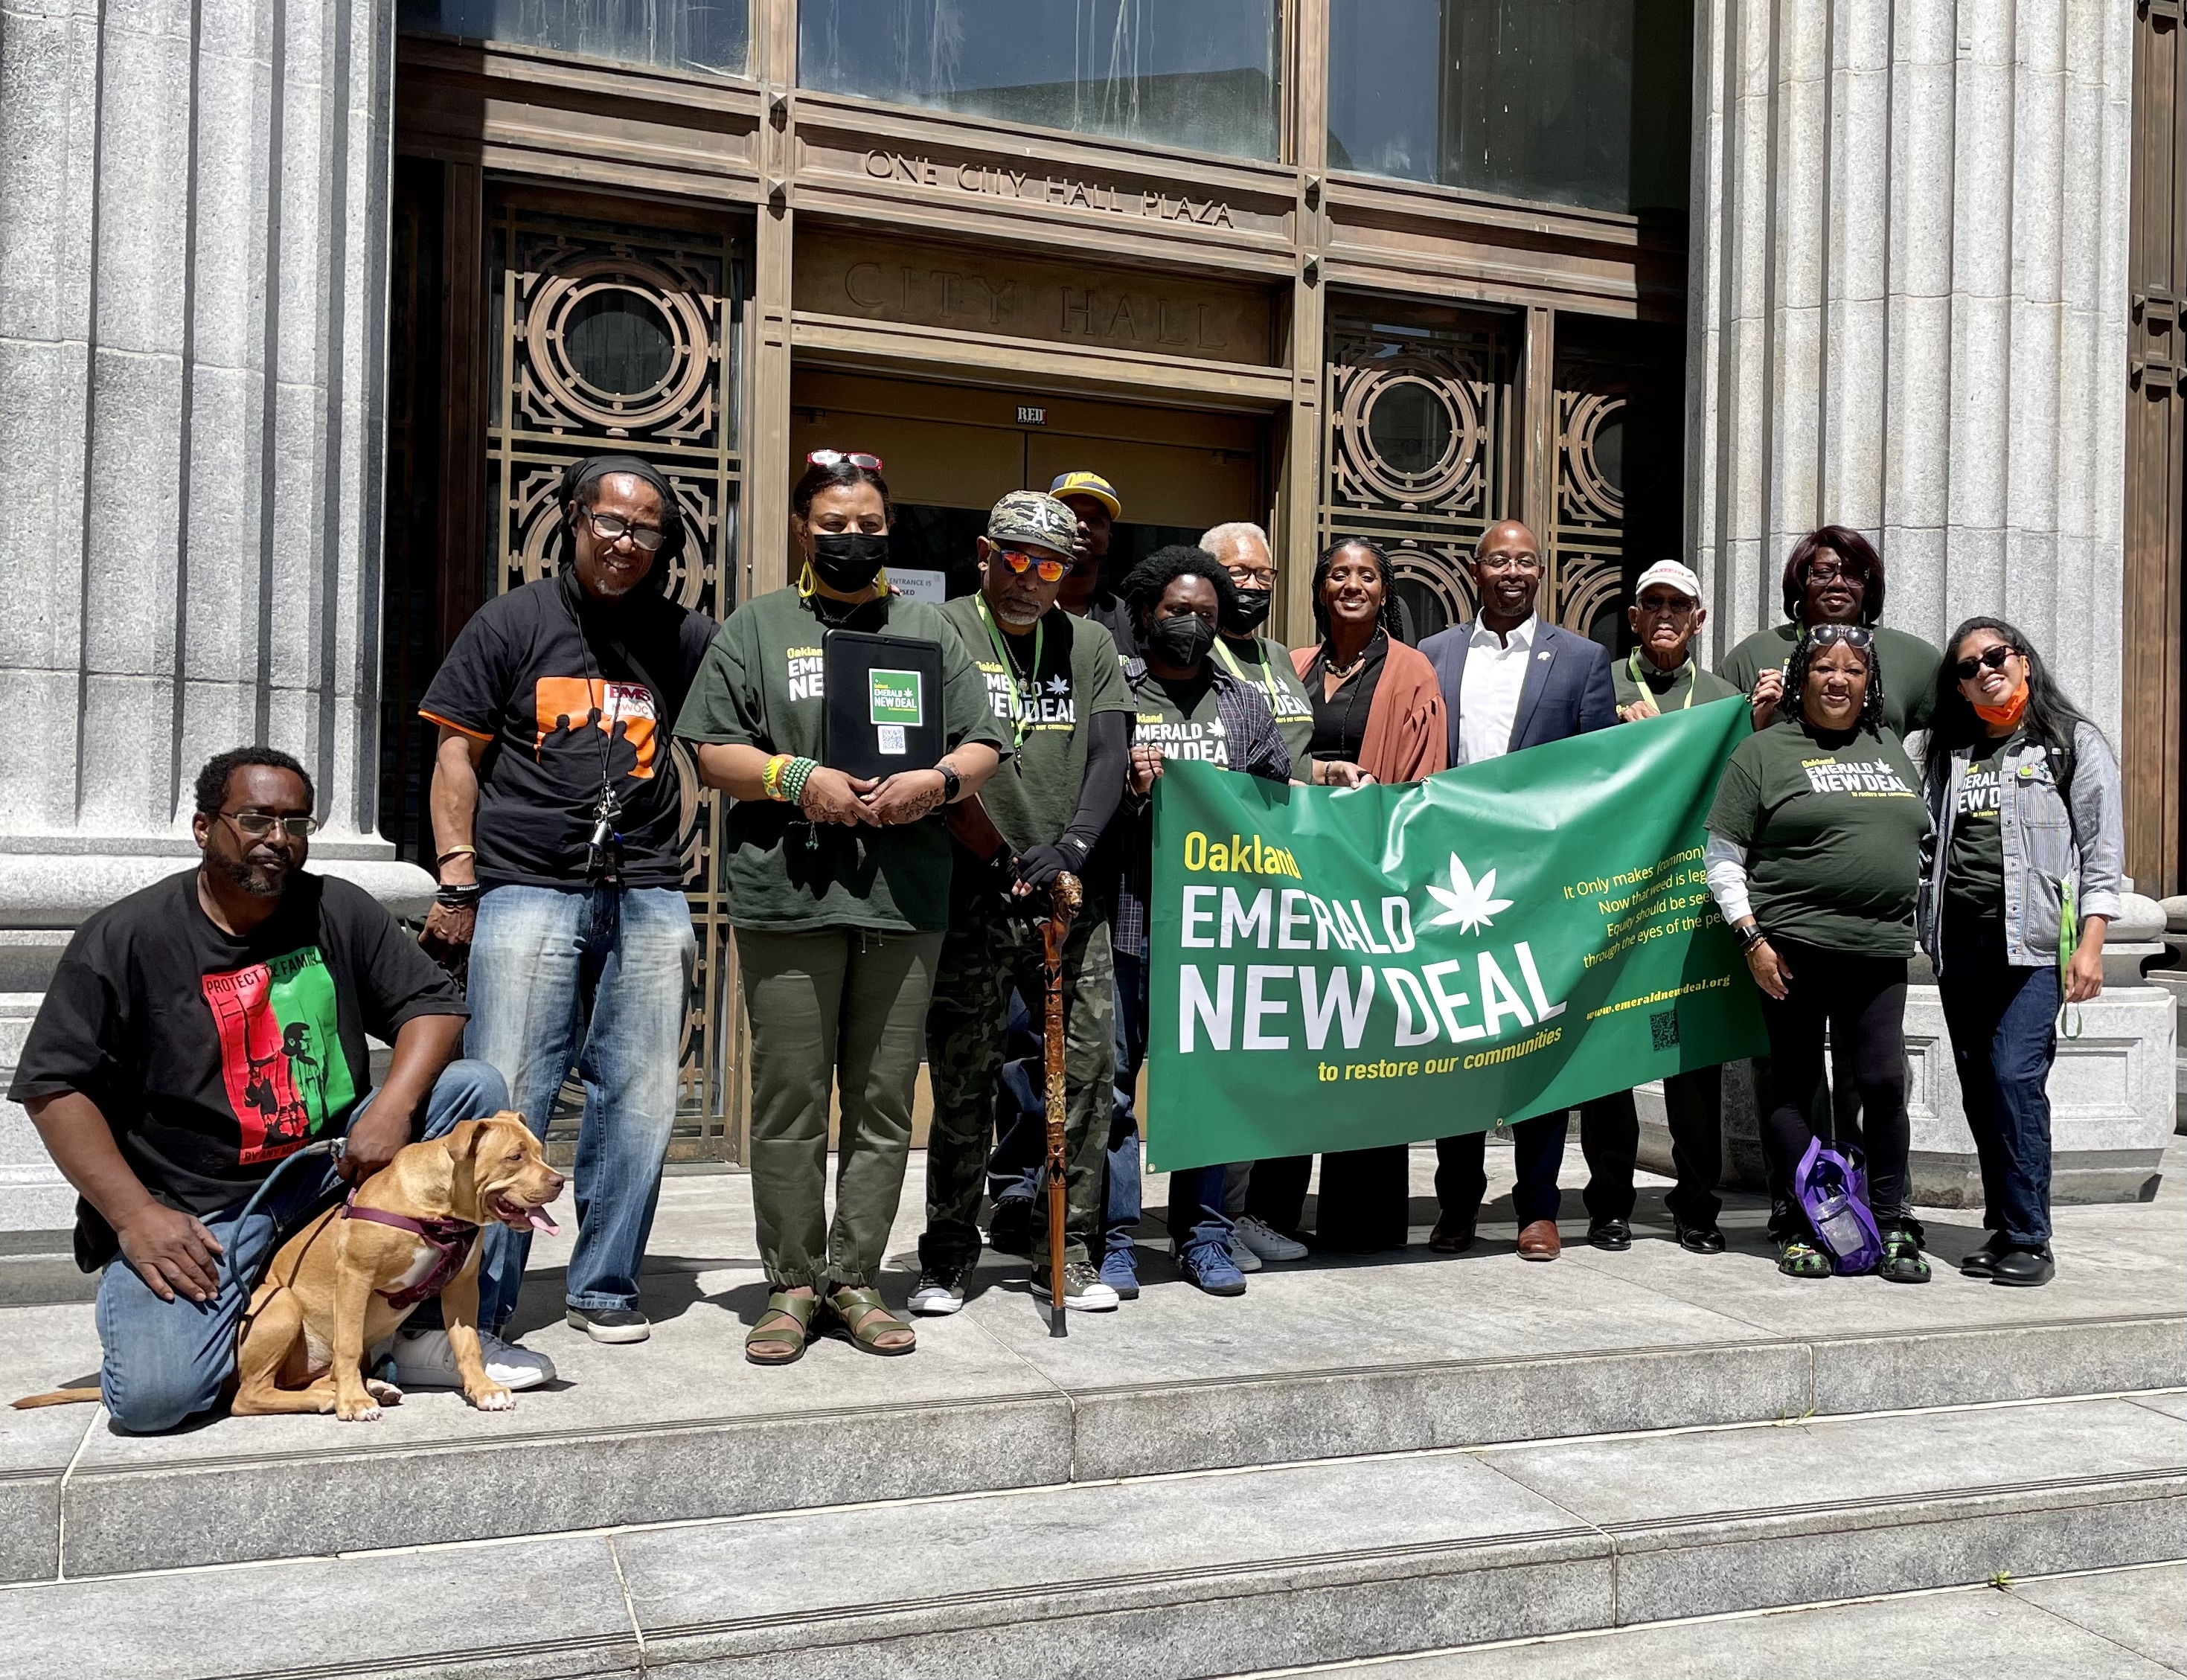 Emerald New Deal Healing And Reparations Measure (aka END HARM) Press Conference, Stakeholder Group Photo with Council members Treva Reid and Loren Taylor